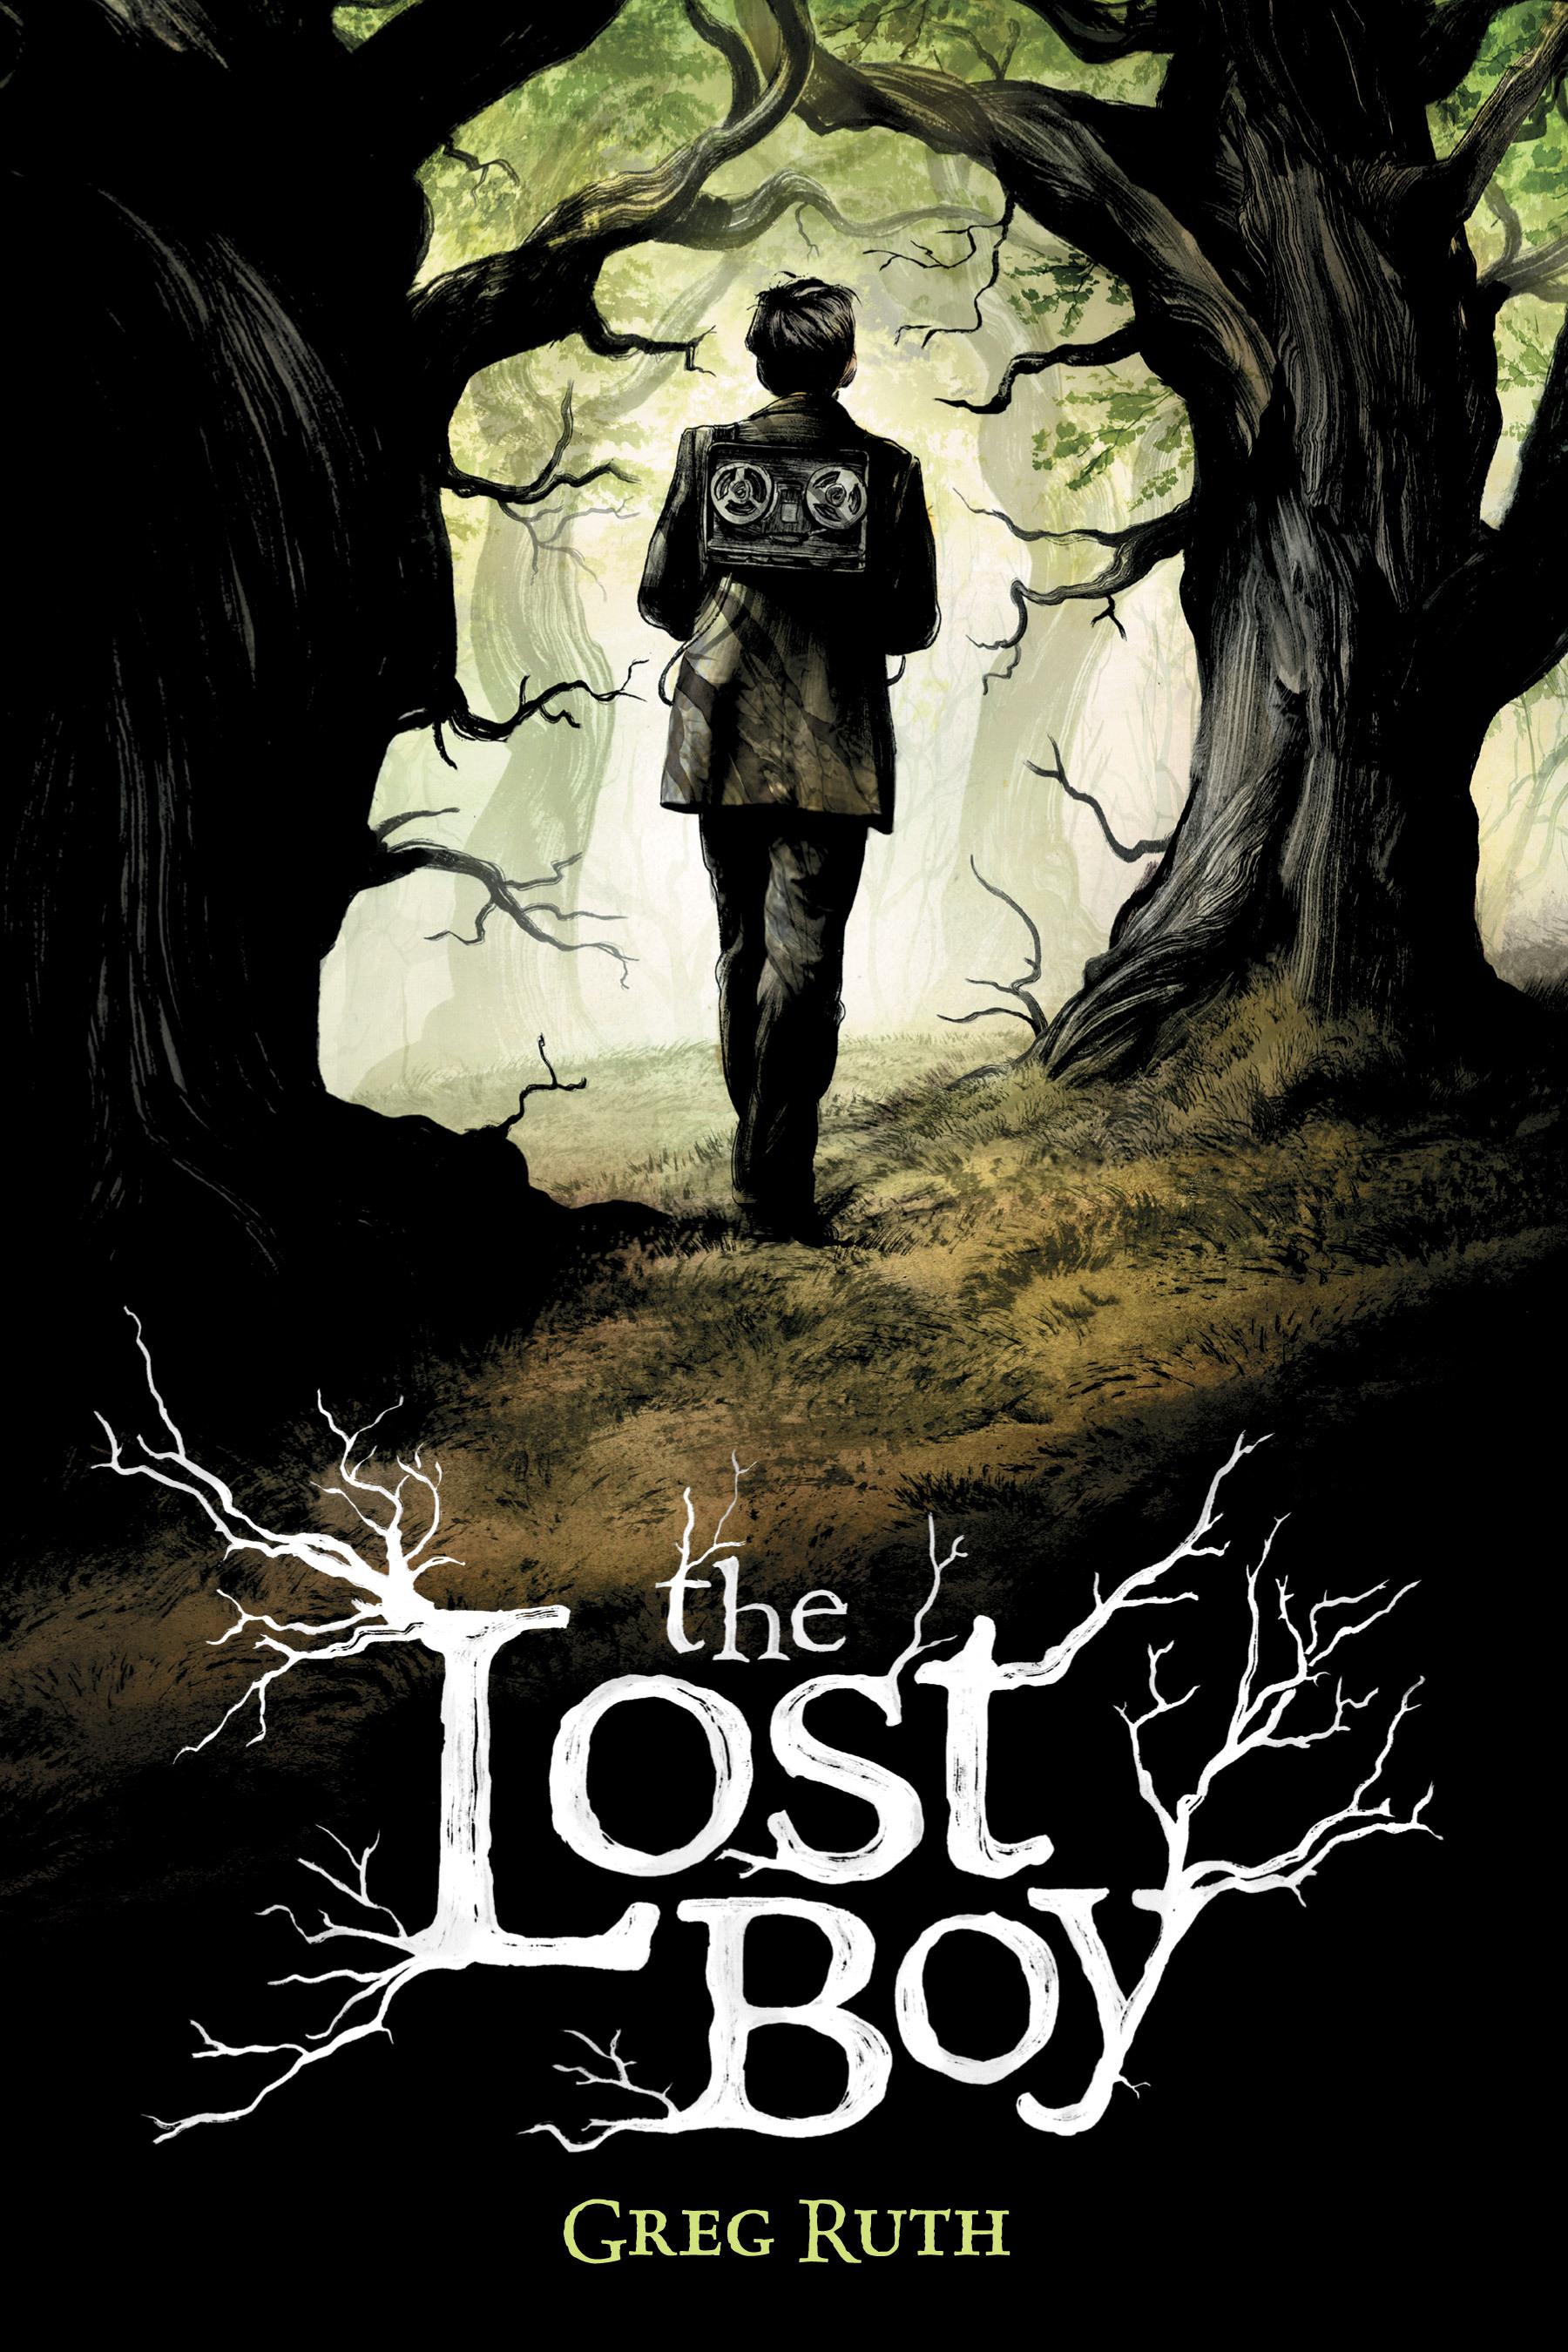 Read online The Lost Boy comic -  Issue # TPB (Part 1) - 1